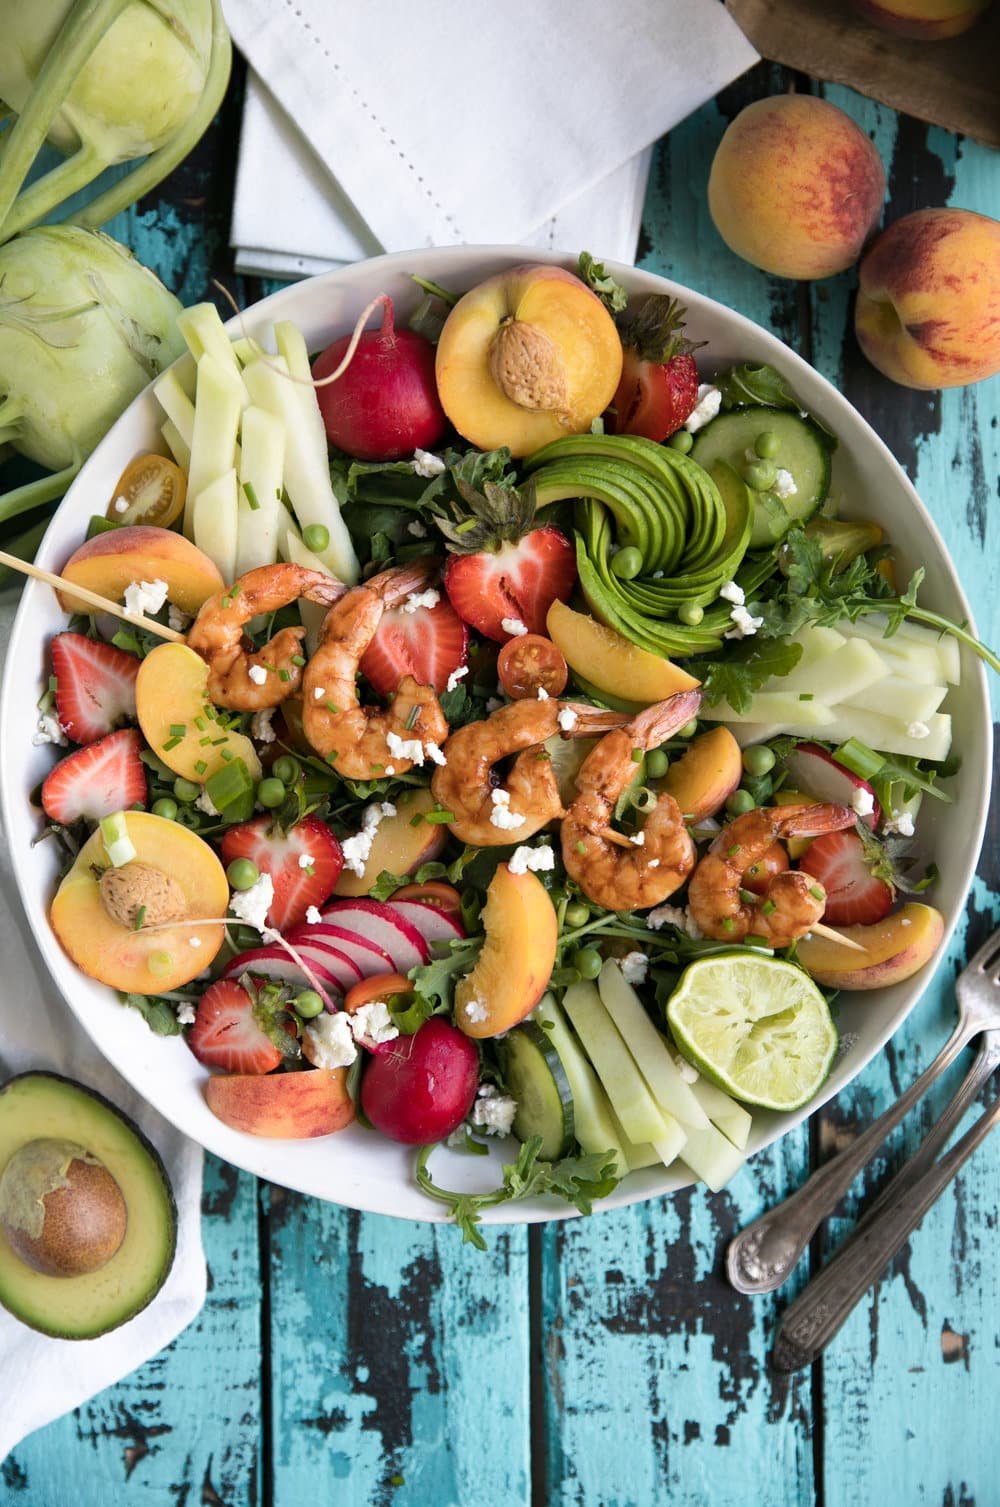 Delicious and refreshing, this Fruit and Vegetable Summer Salad explodes with all the awesome flavors of sweet peaches, kohlrabi, strawberries, and spicy chipotle shrimp!